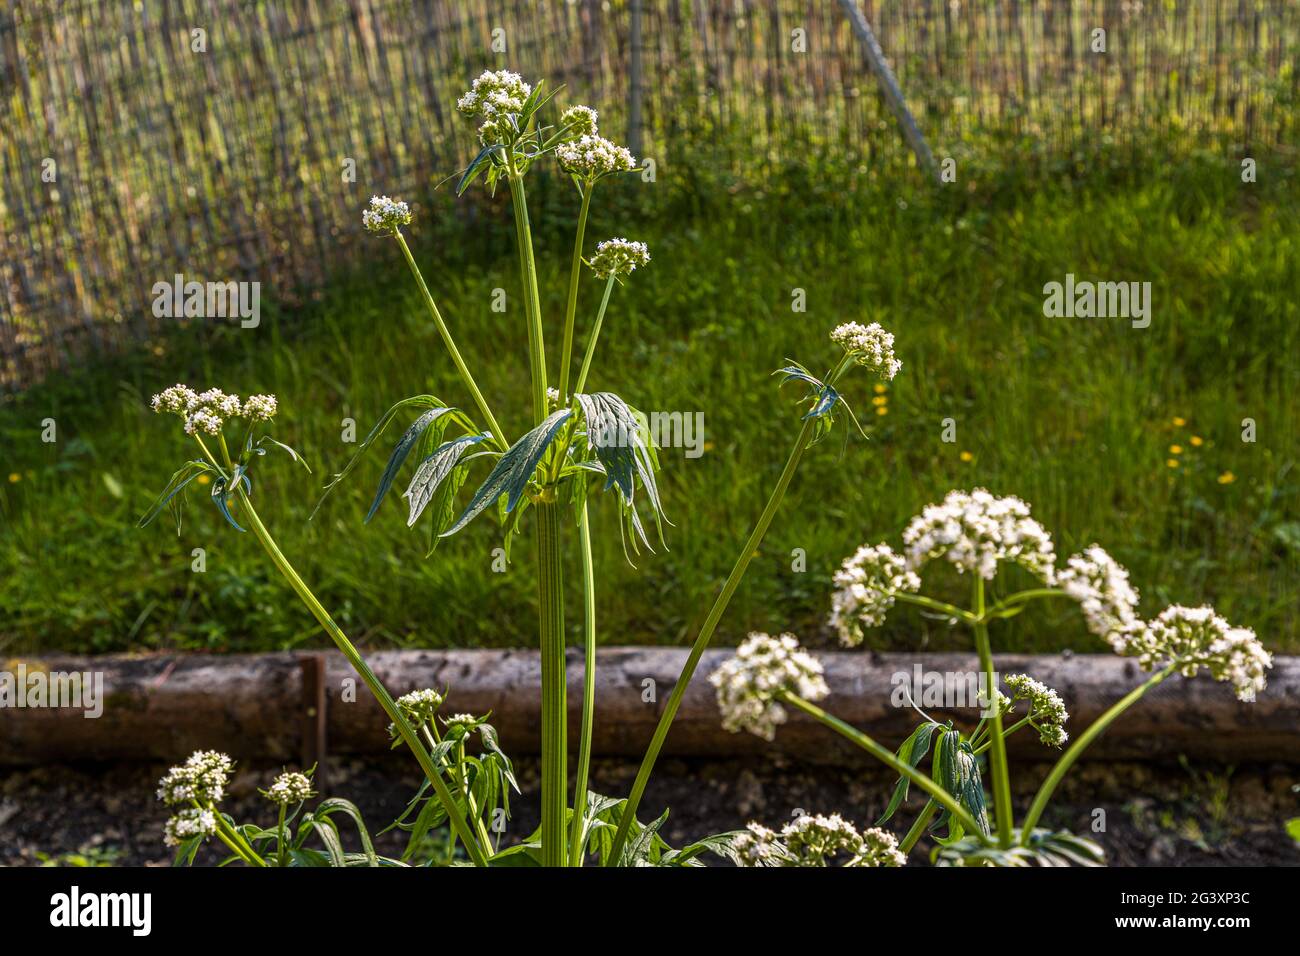 Valerian plant growing in Ahn, Luxembourg Stock Photo